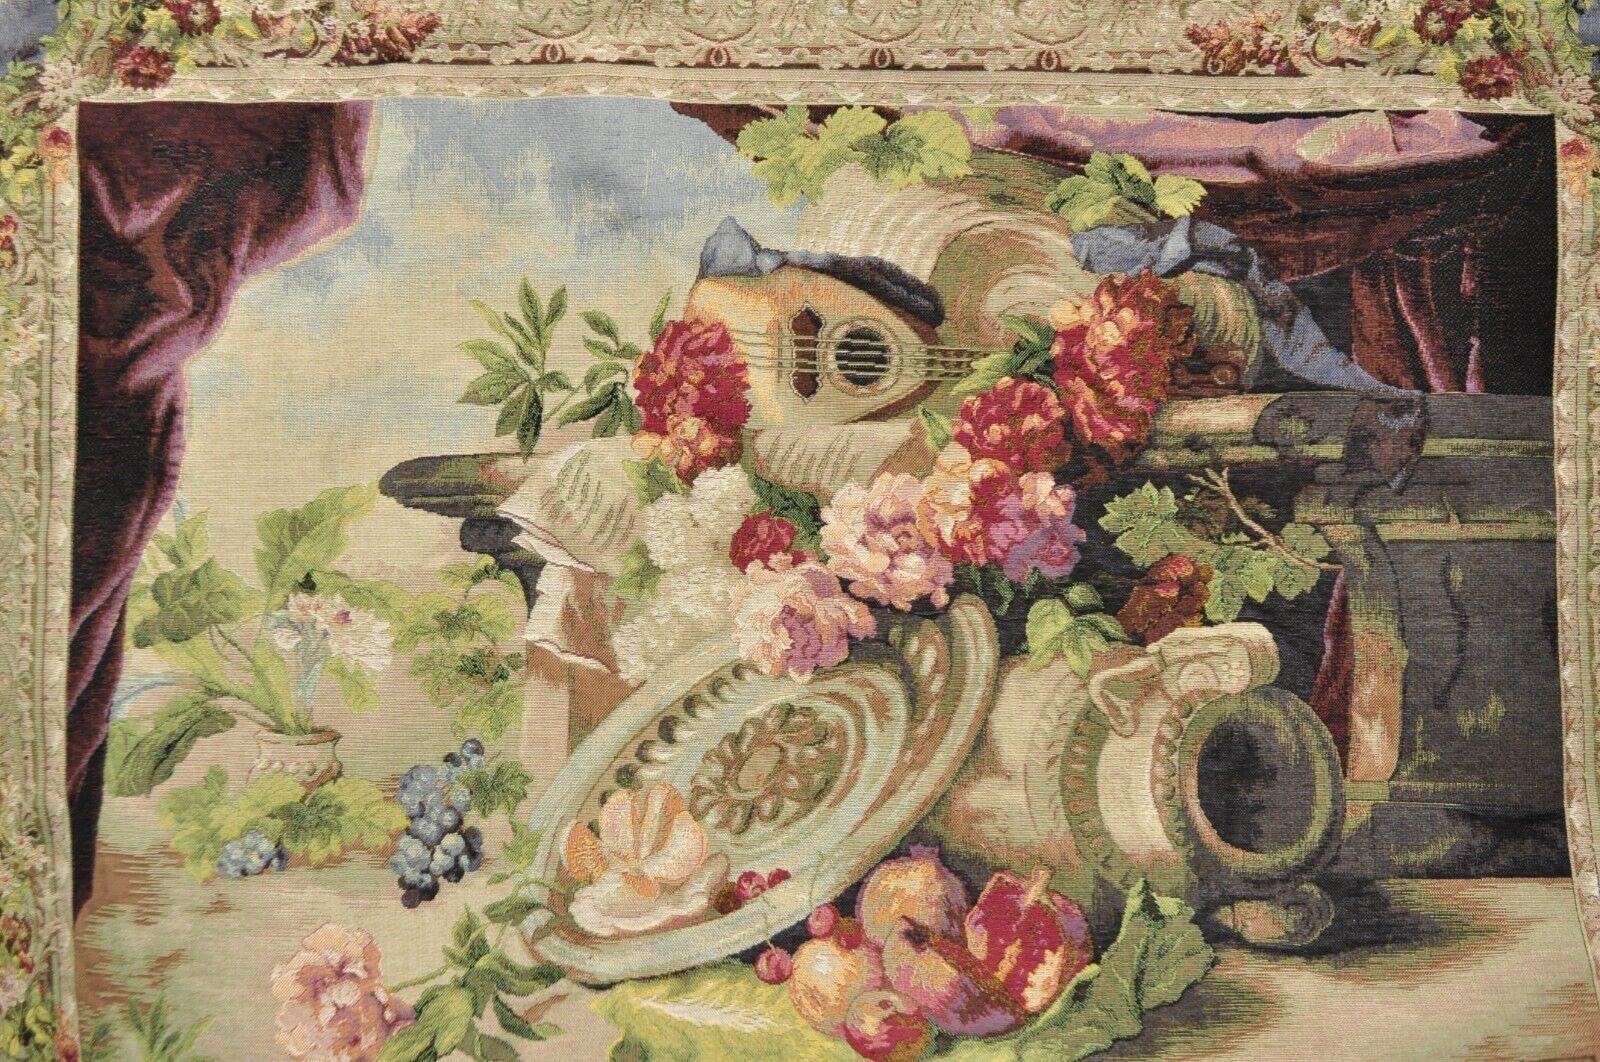 French Provincial Jacquard Woven French Wall Tapestry Still Life Flowers & Mandolin by J&D For Sale